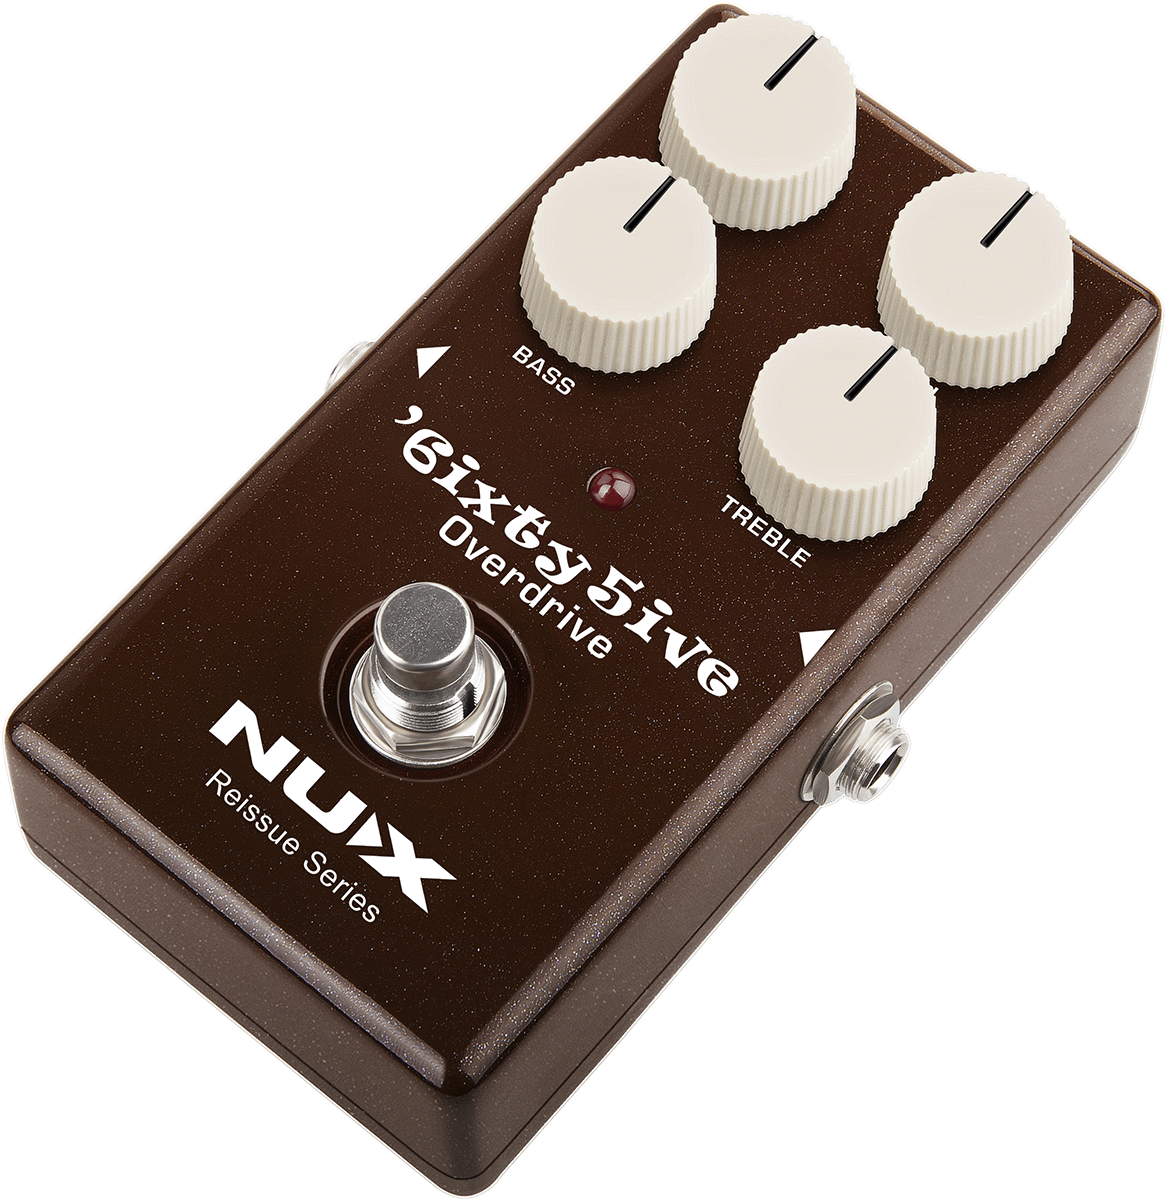 Nux Sixty Five Overdrive - Overdrive/Distortion/Fuzz Effektpedal - Variation 1